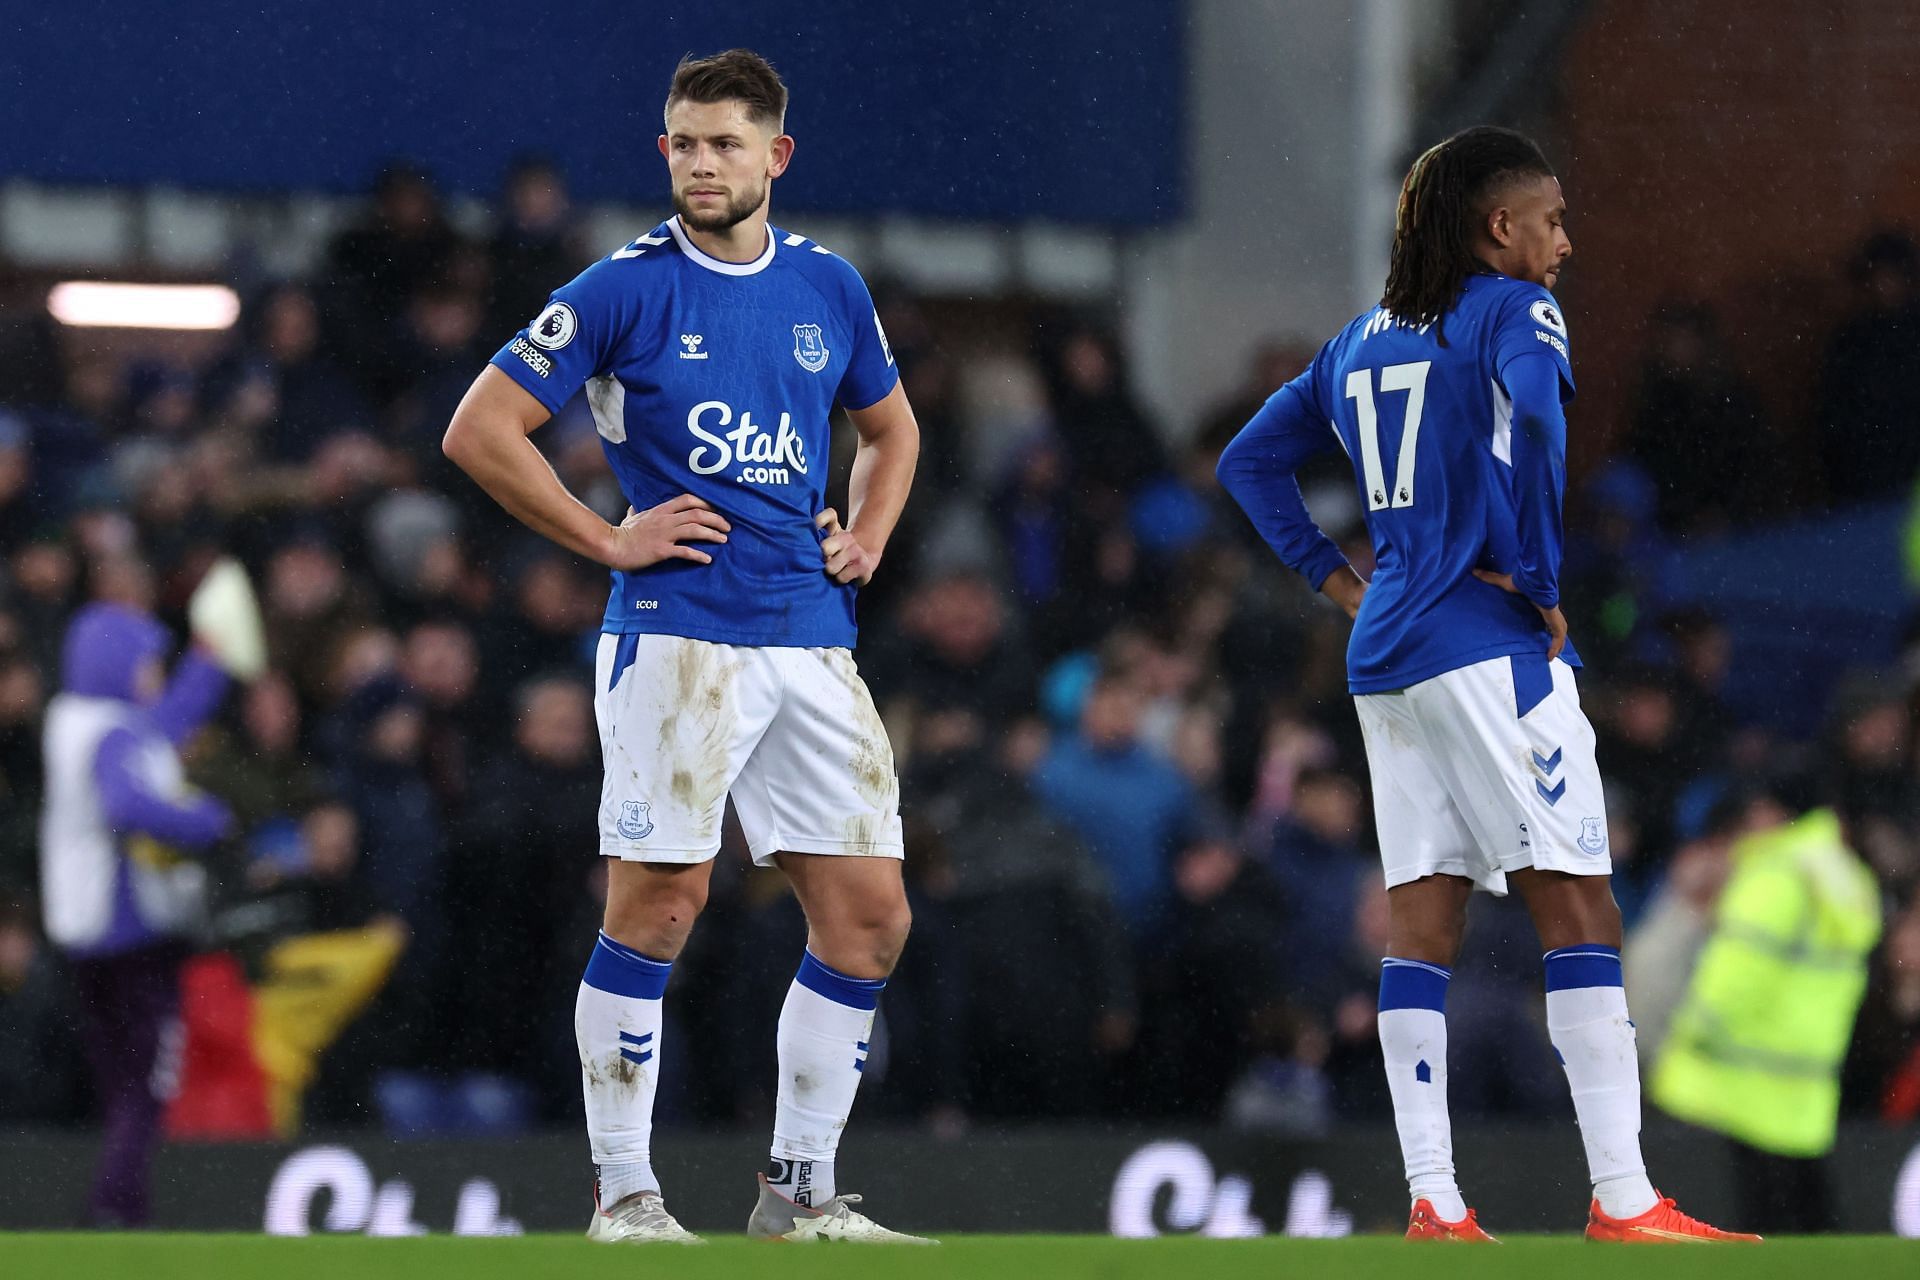 James Tarkowski has not been able to replicate his Burnley form at Everton